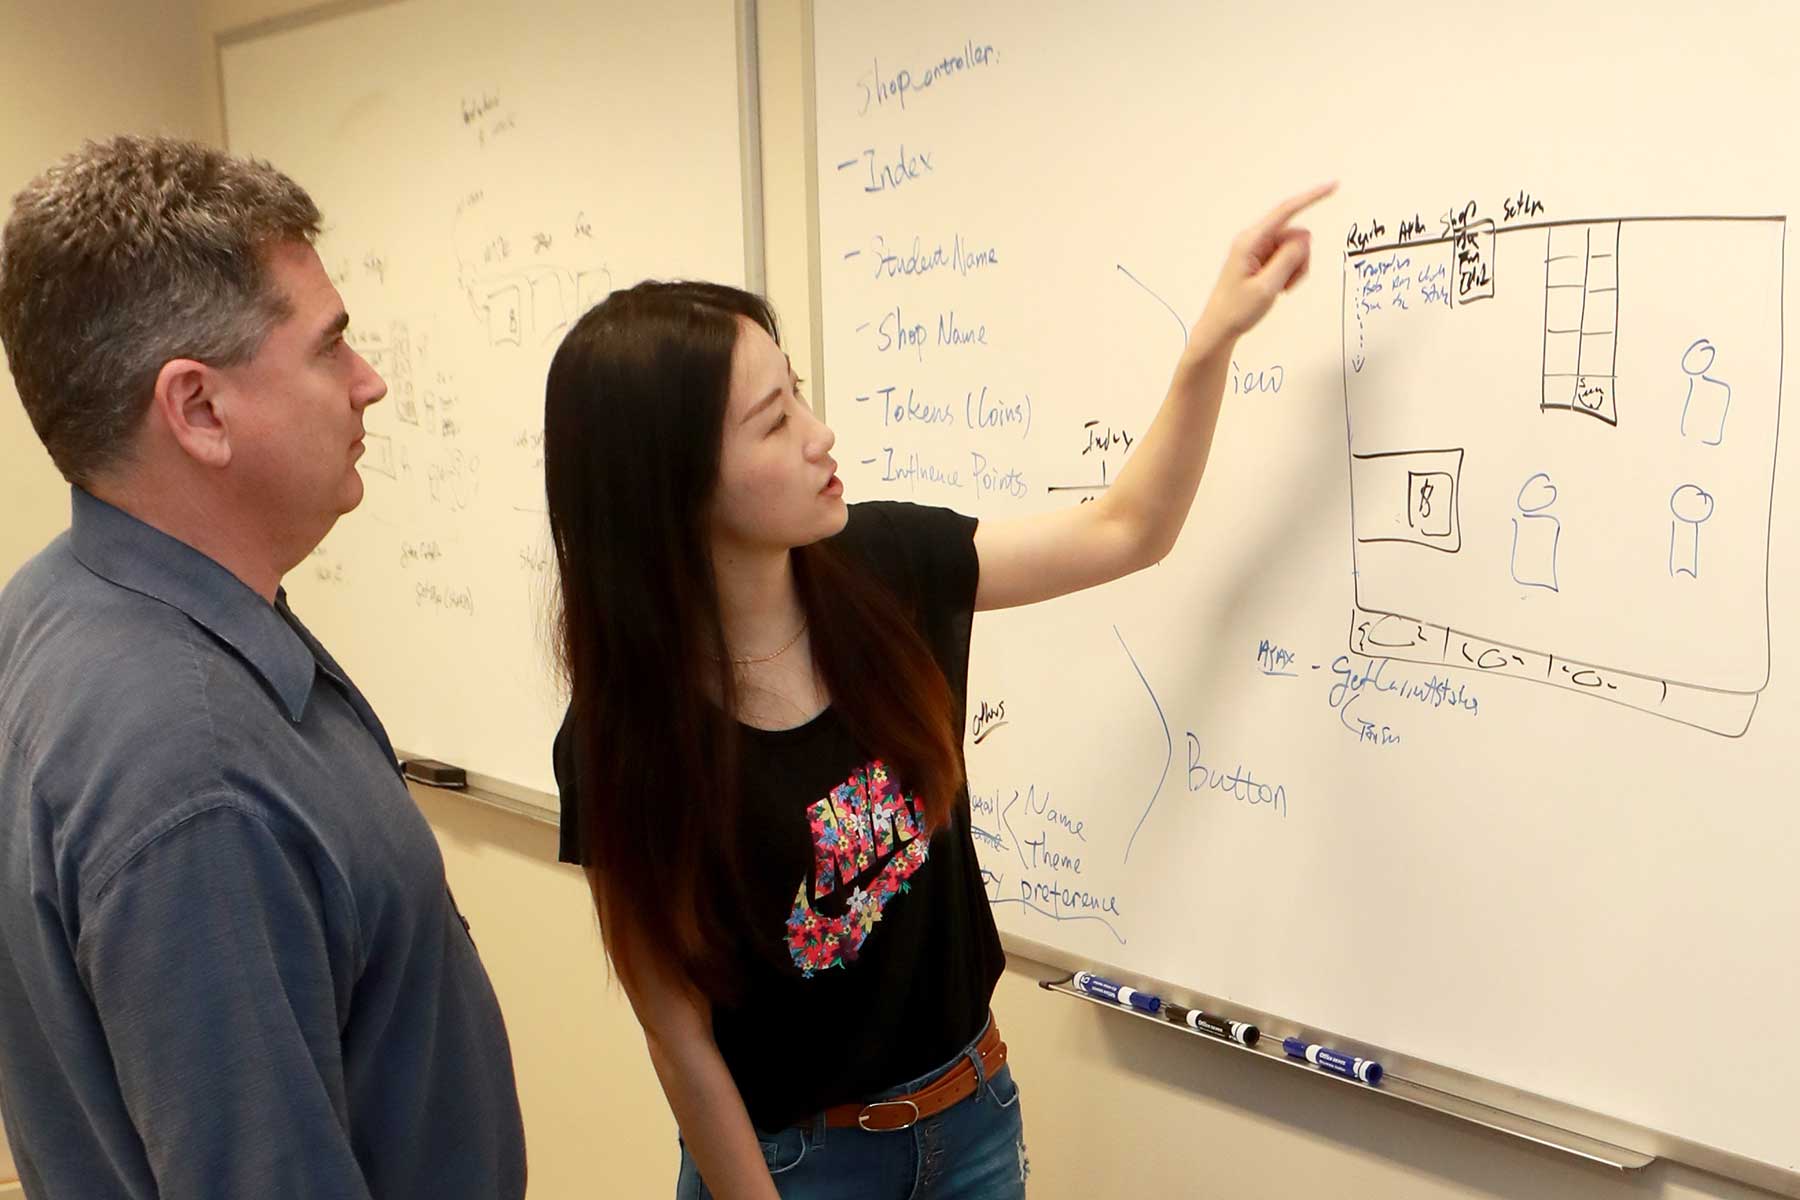 Professor Mike Koenig at the whiteboard with a student